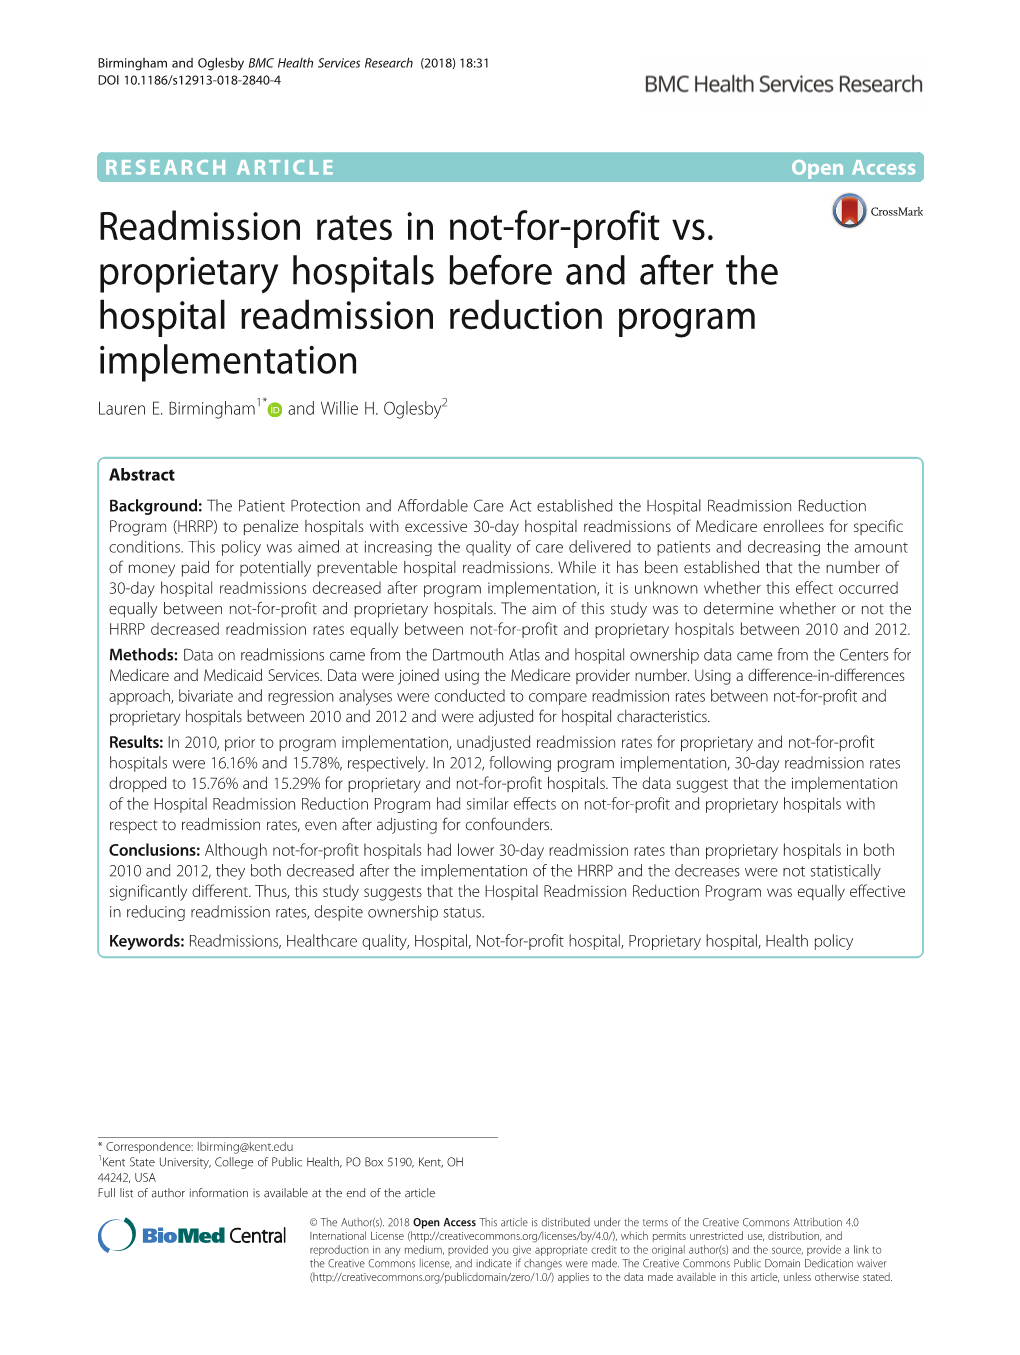 Readmission Rates in Not-For-Profit Vs. Proprietary Hospitals Before and After the Hospital Readmission Reduction Program Implementation Lauren E